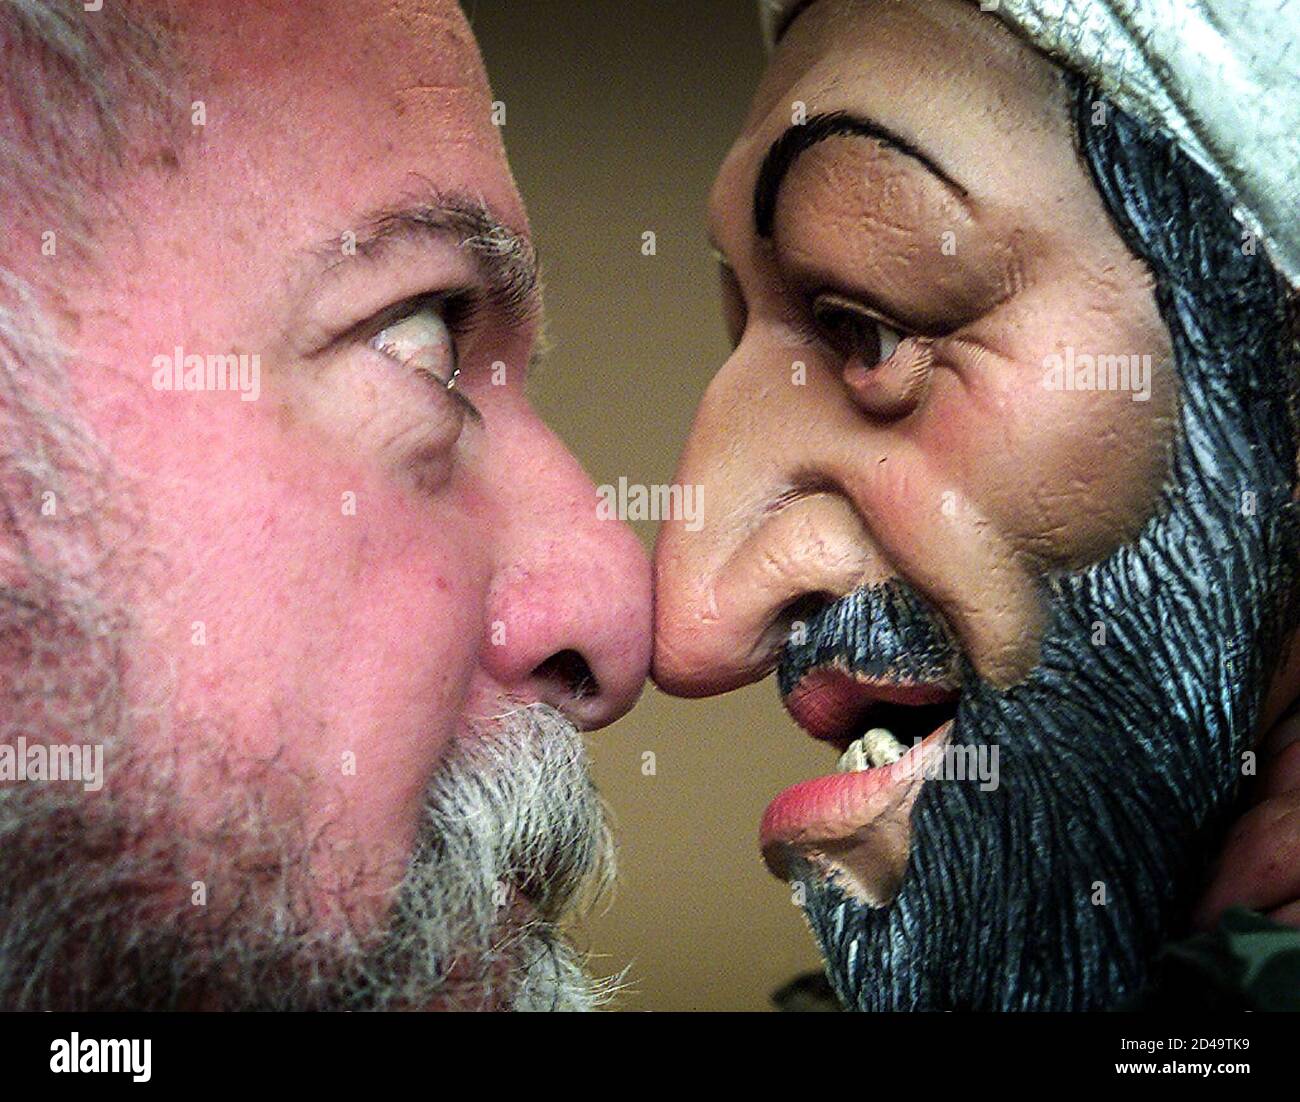 A puppet of Osama bin Laden comes face to face with its creator Roger Law  at the Sotheby's auction house at Olympia in central London, November 23  2001. The puppet has been